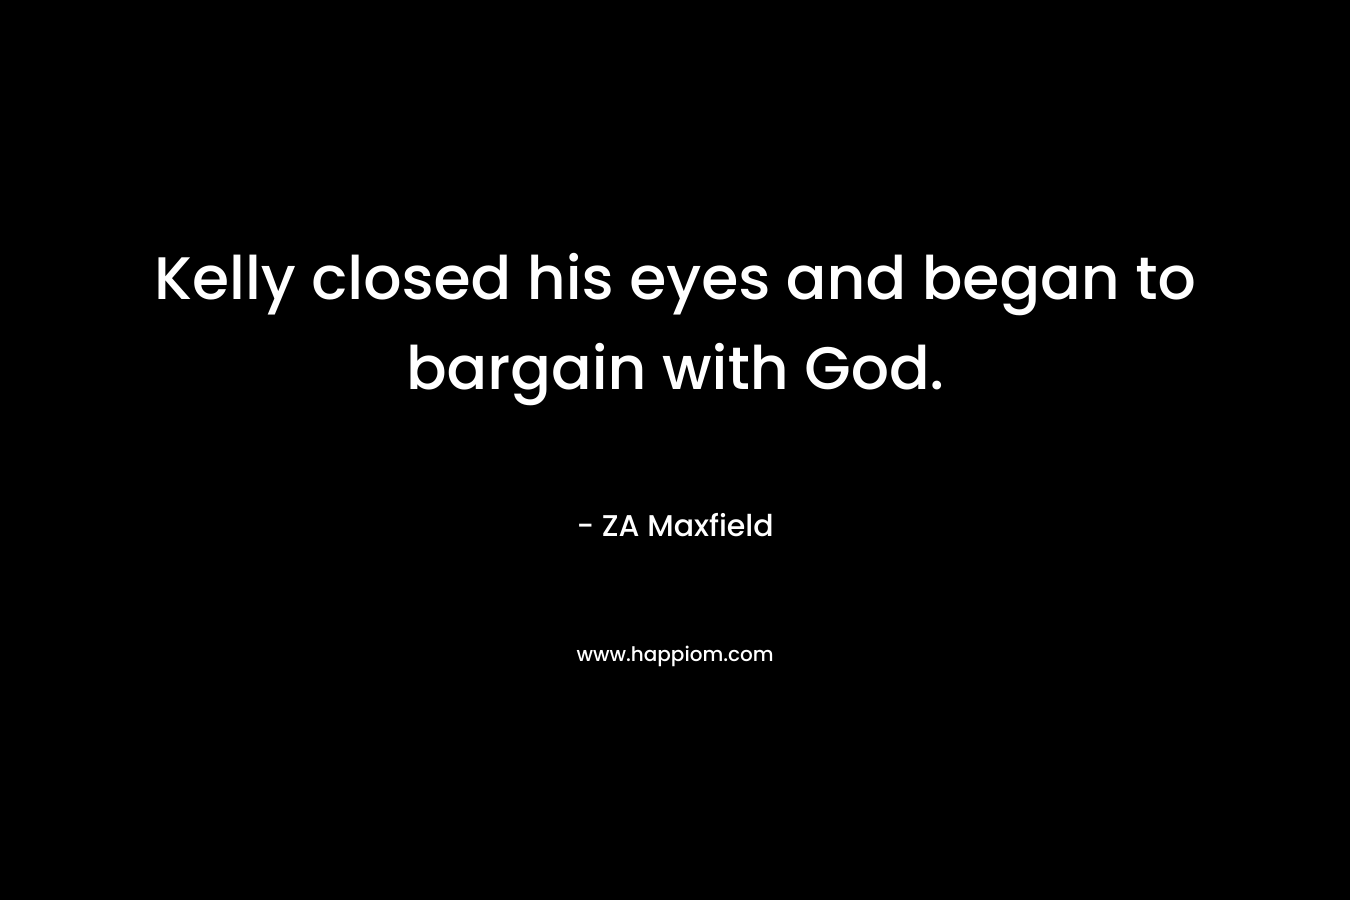 Kelly closed his eyes and began to bargain with God. – ZA Maxfield